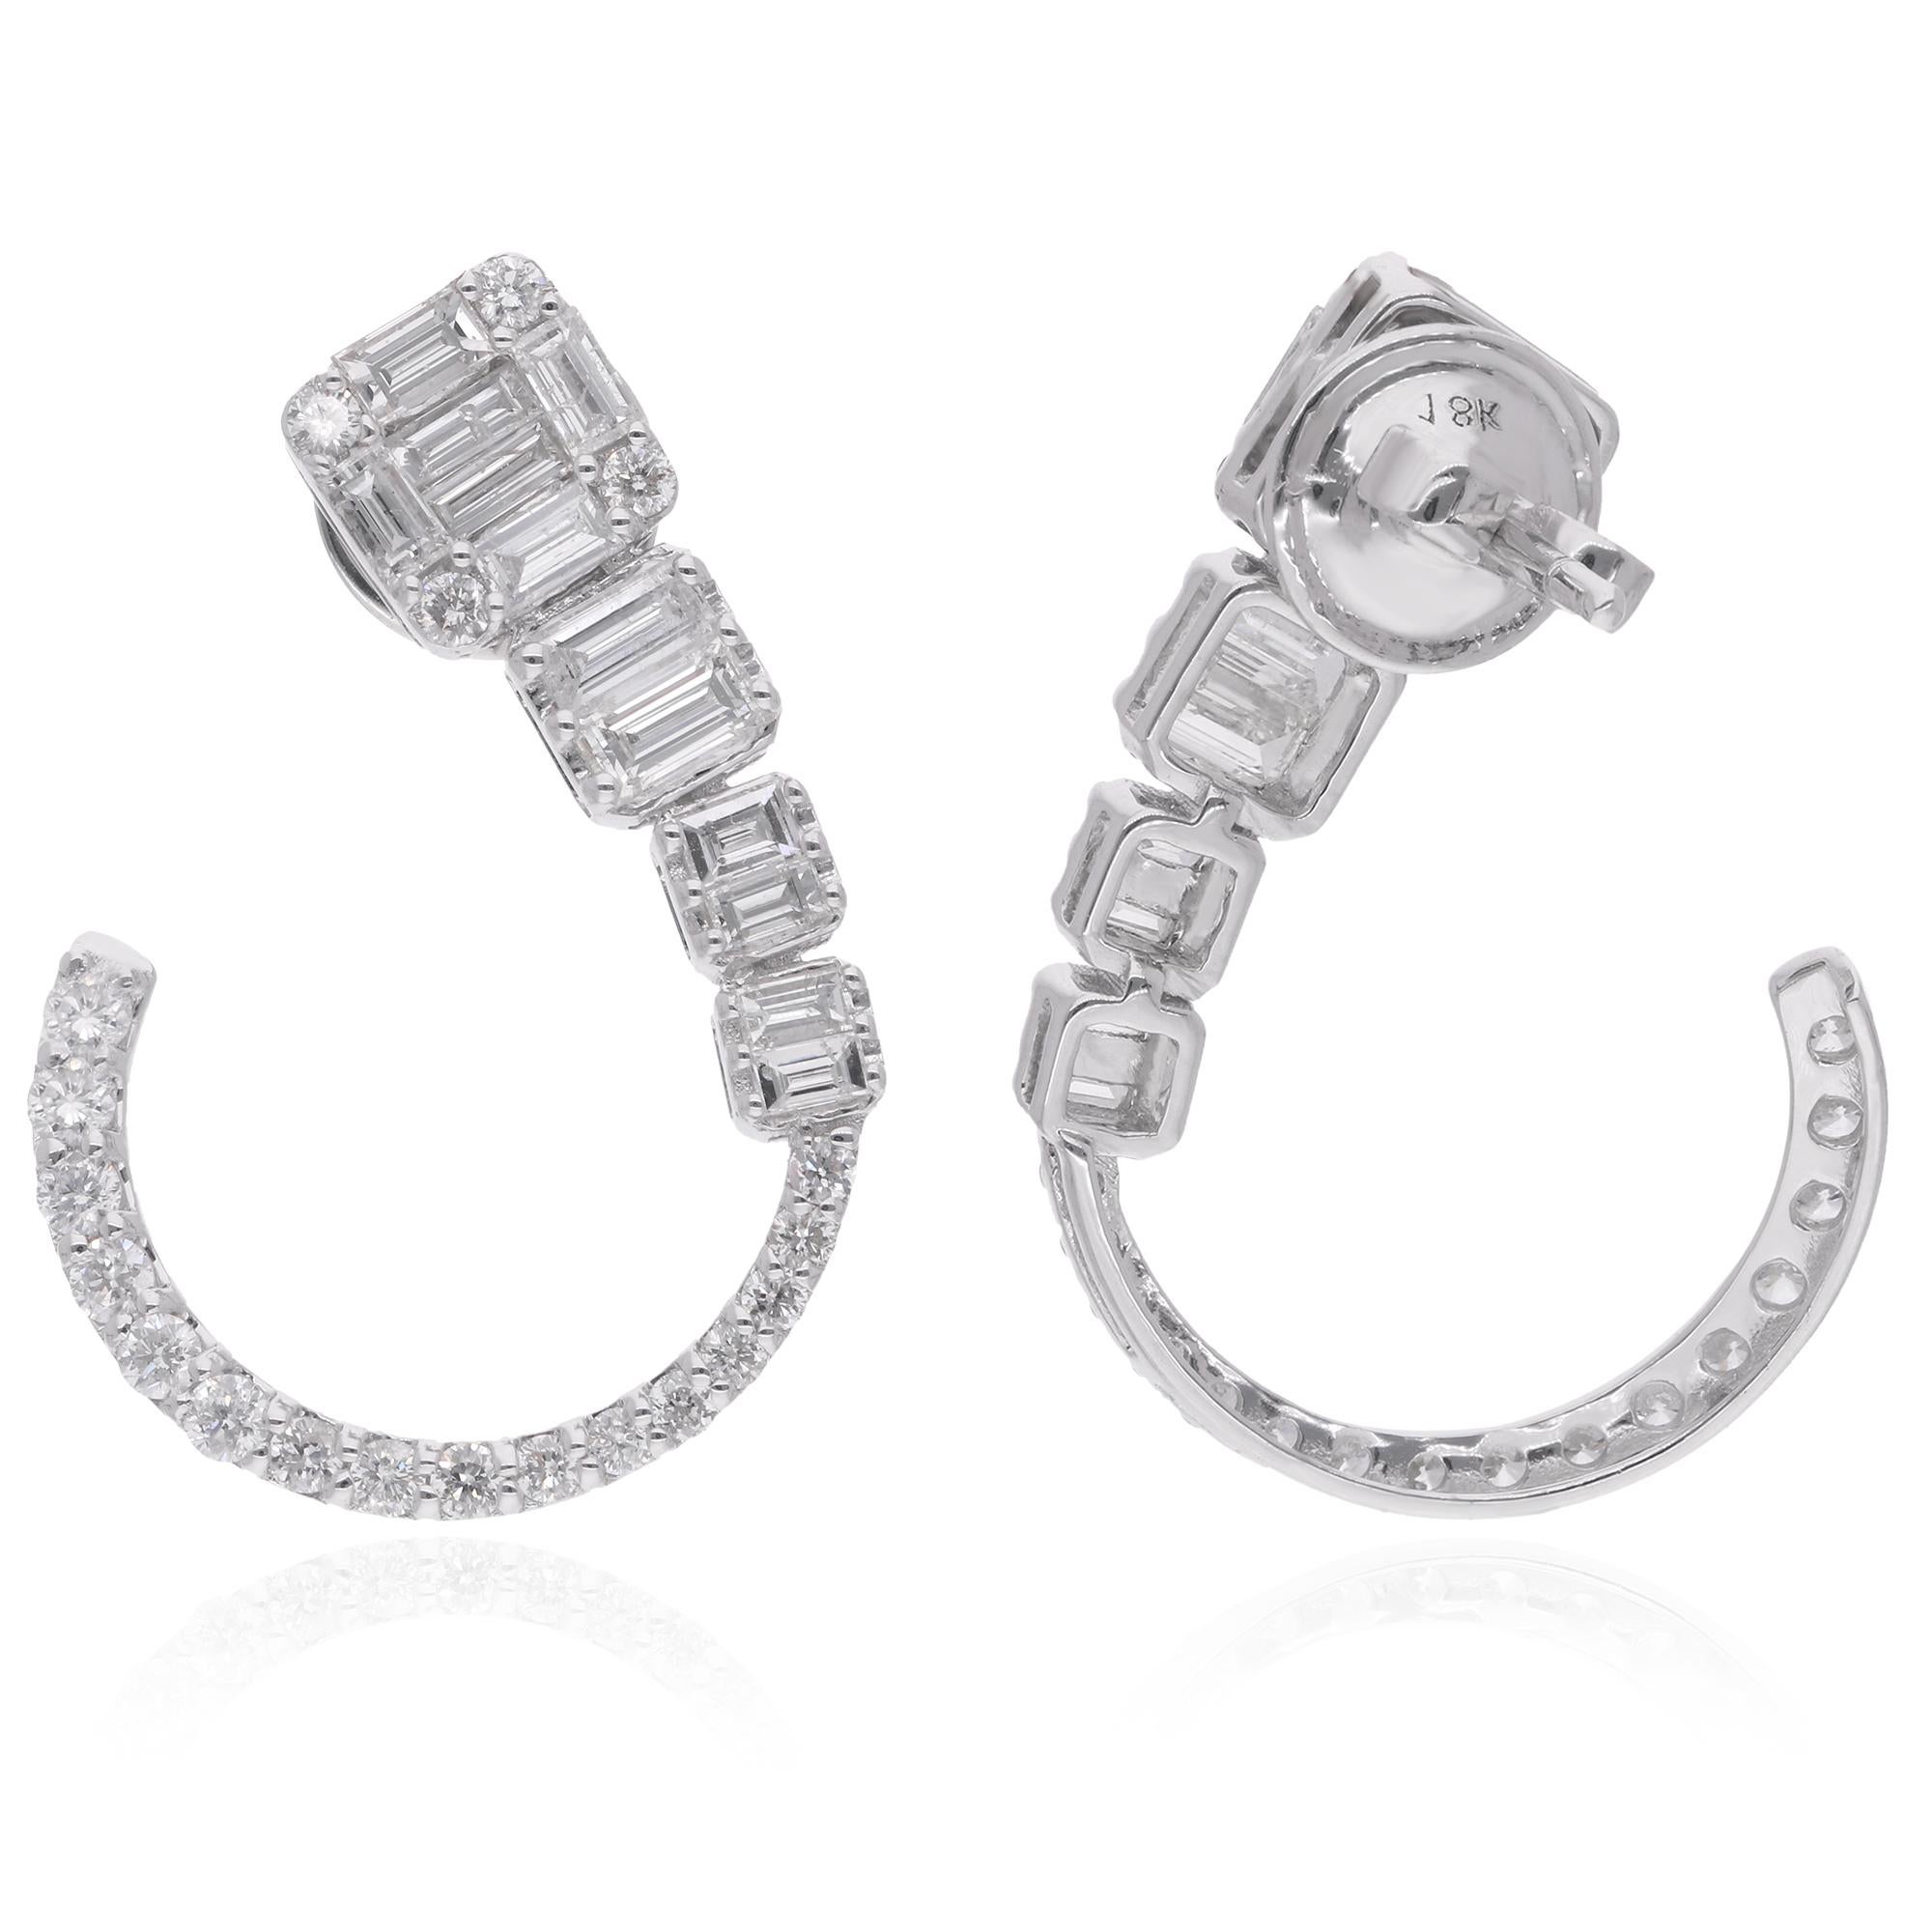 Elevate your style with the sophisticated allure of these 1.85 Carat Baguette Round Diamond Hoop Earrings, meticulously crafted in 18 karat white gold to adorn your ears with timeless elegance and brilliance. Each earring features a captivating